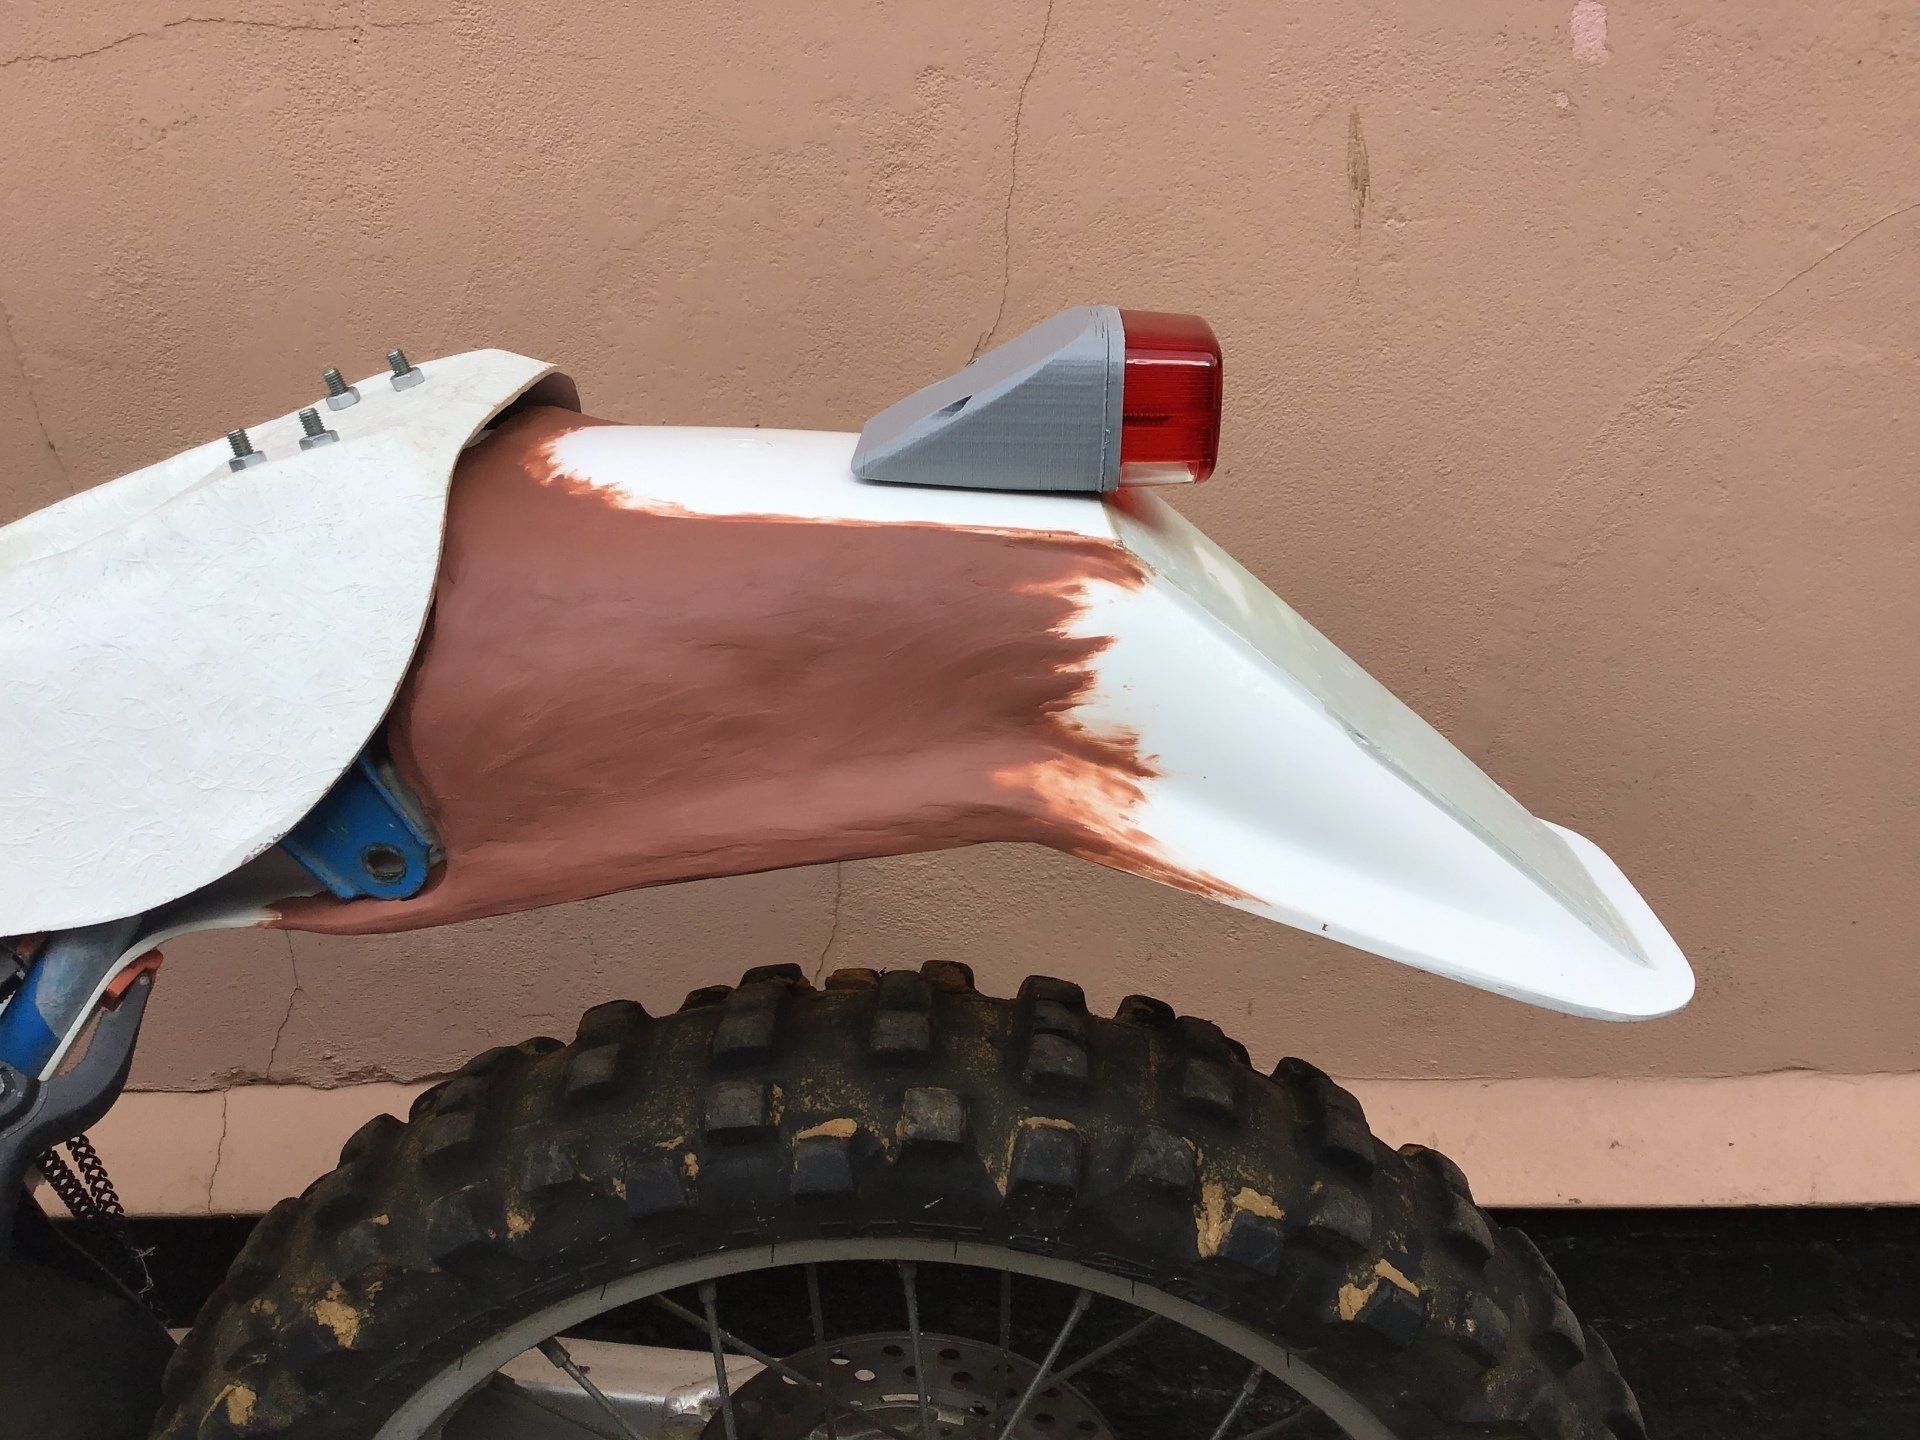 3D printed rear light mount trial fitting